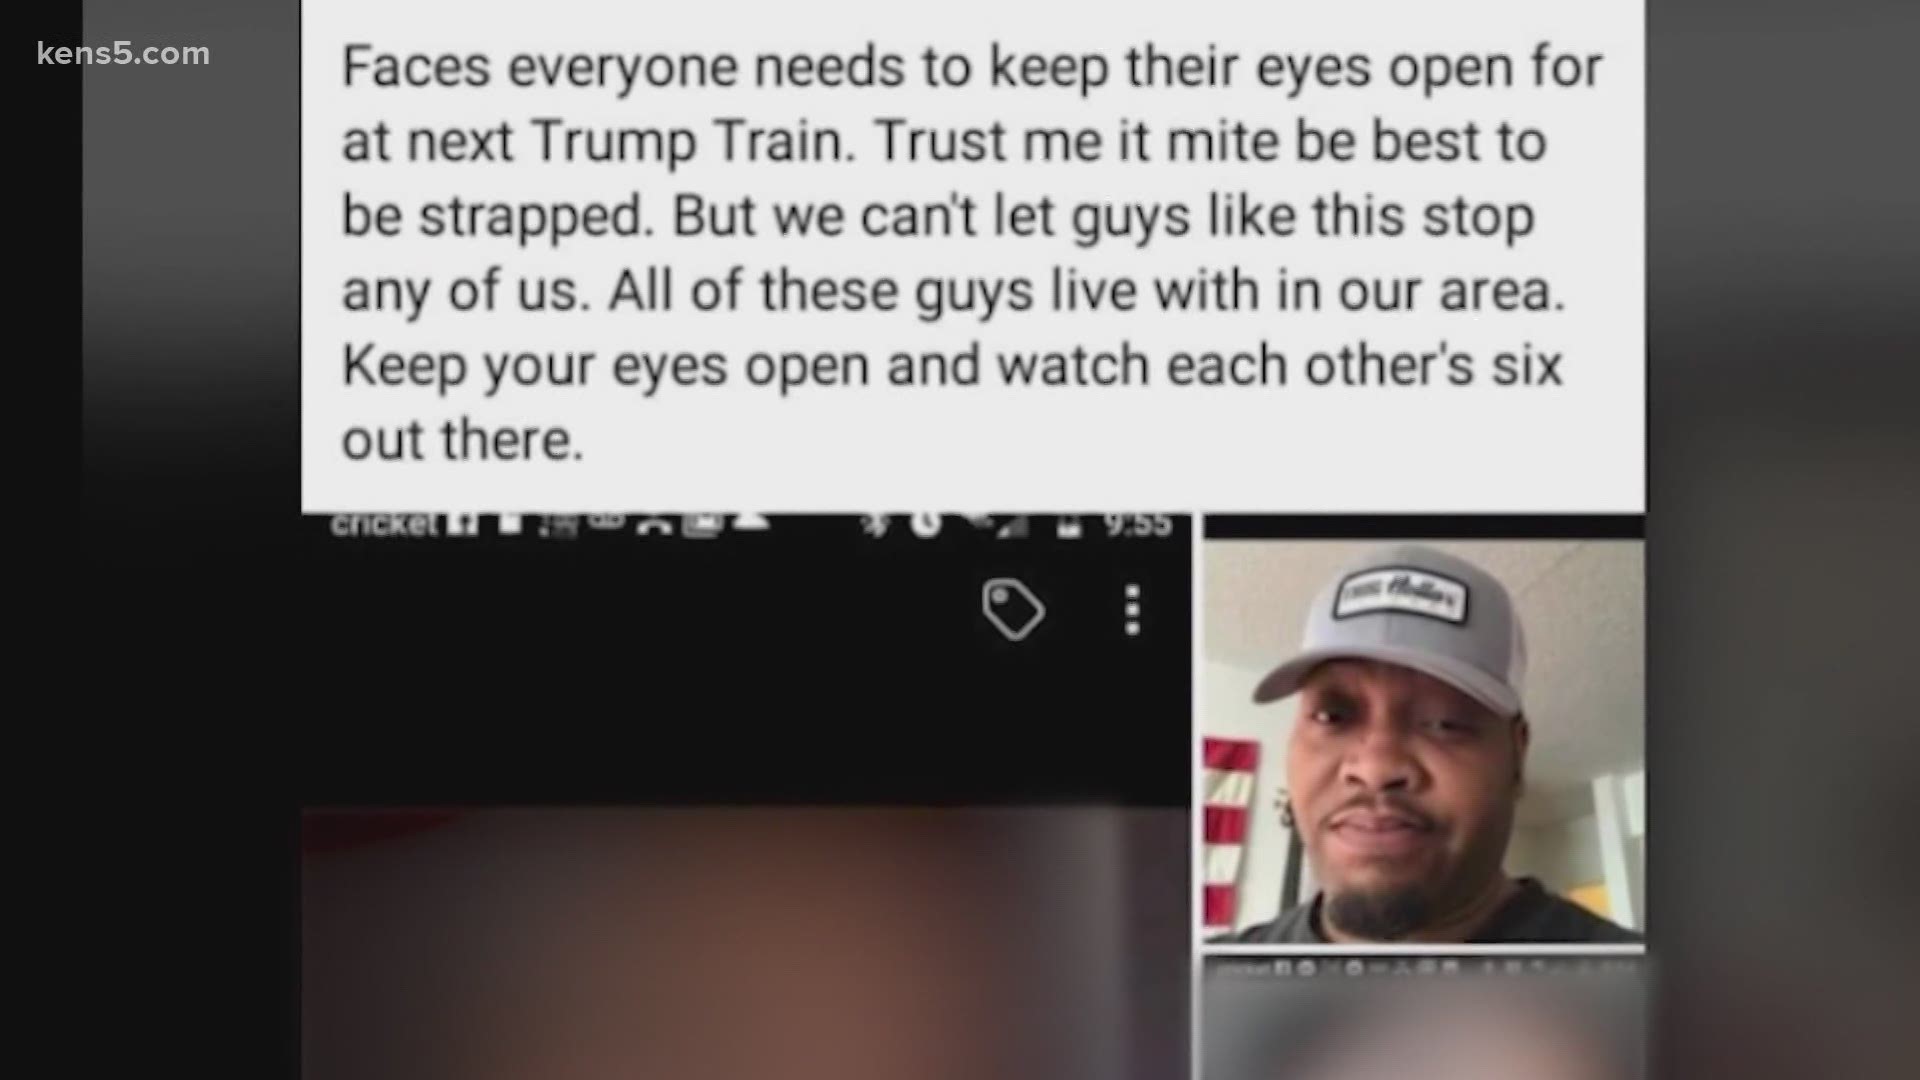 Andrae Blissett doesn't know why he was targeted in the Facebook post, which told people to 'be strapped' and looking for the men at an event in New Braunfels.